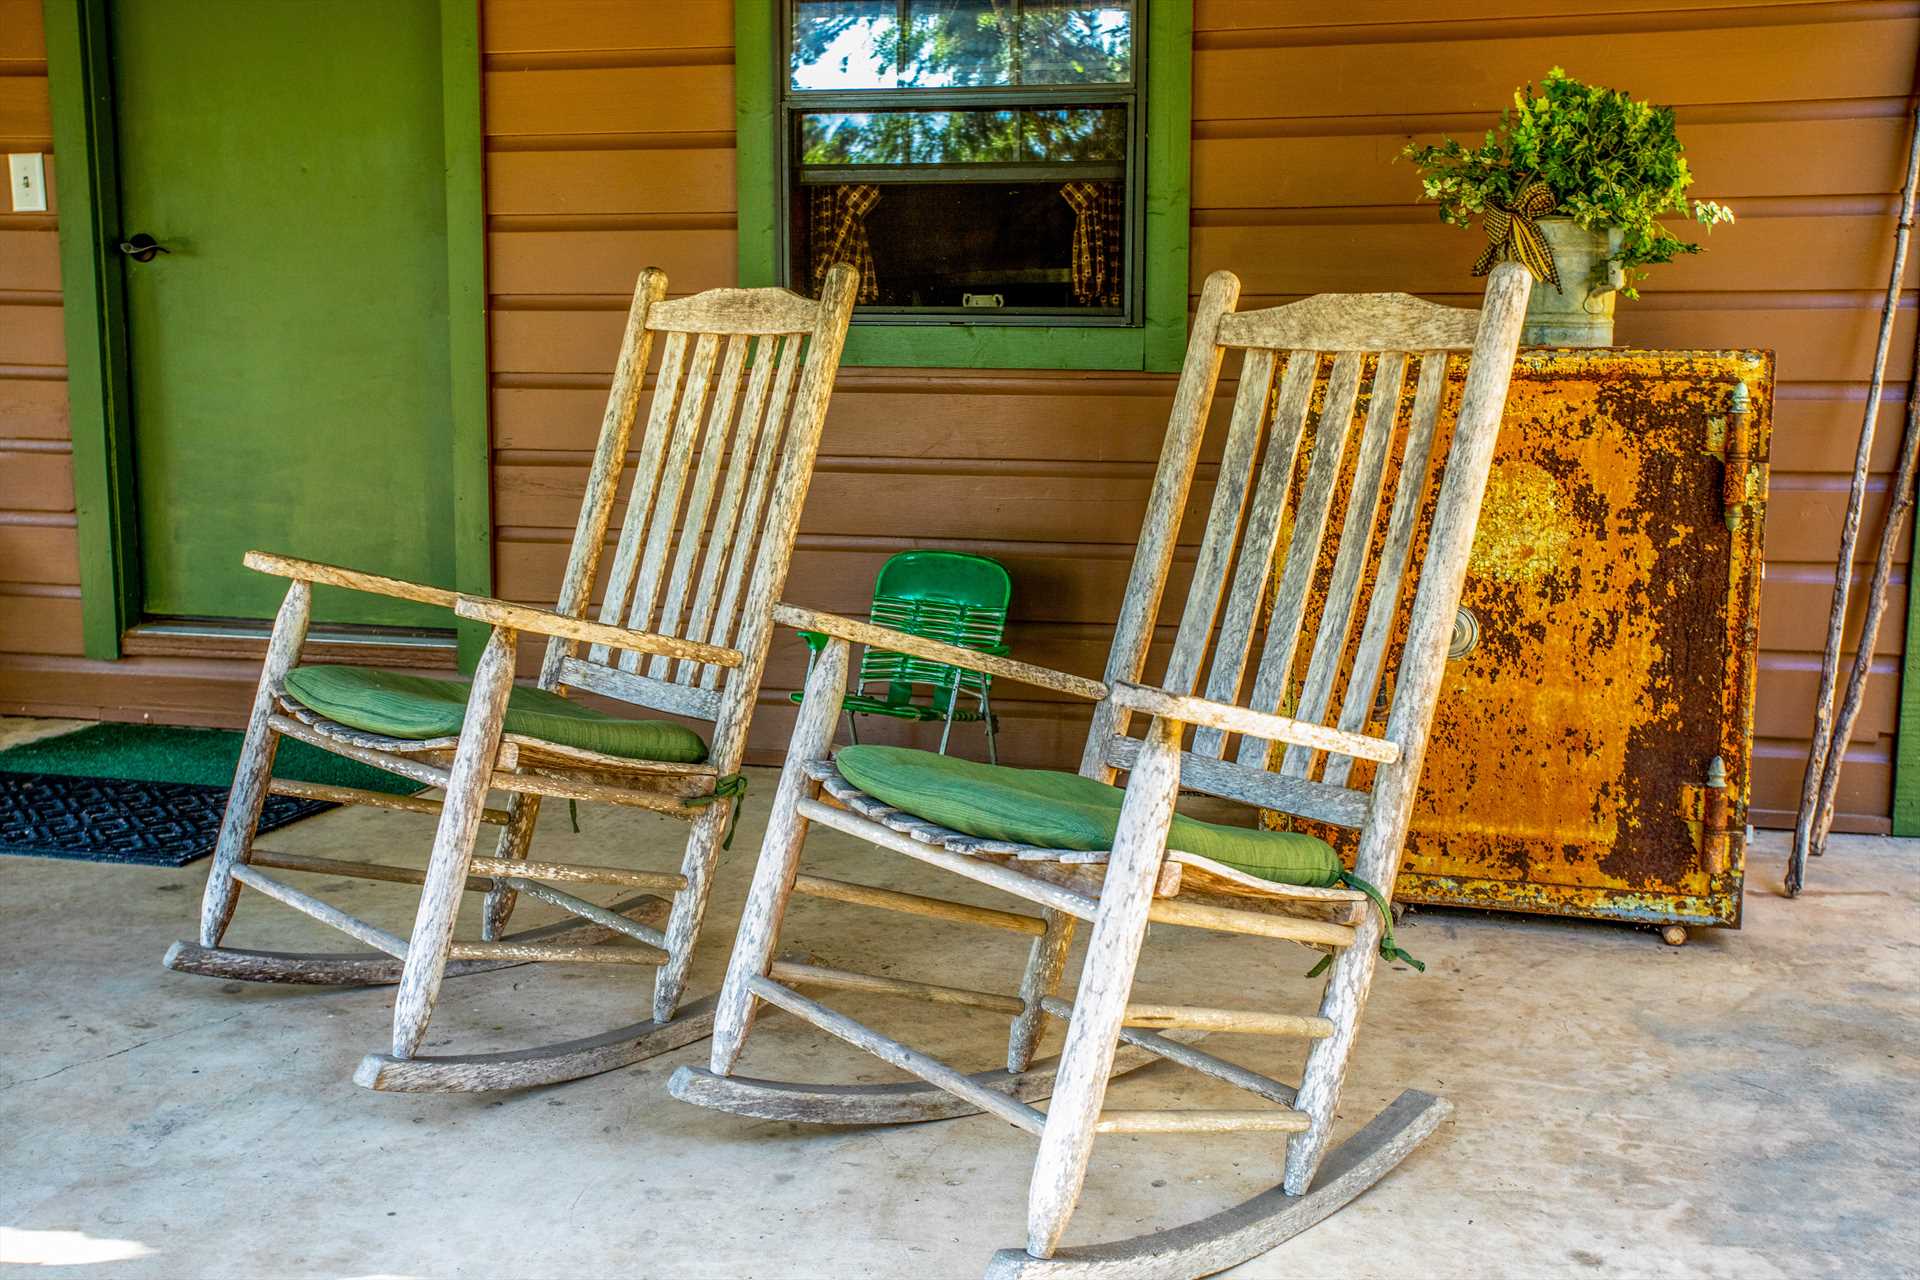                                                 Sip a refreshing beverage of your choice and while away a quiet moment or two on the nostalgic and comfy rocking chairs!